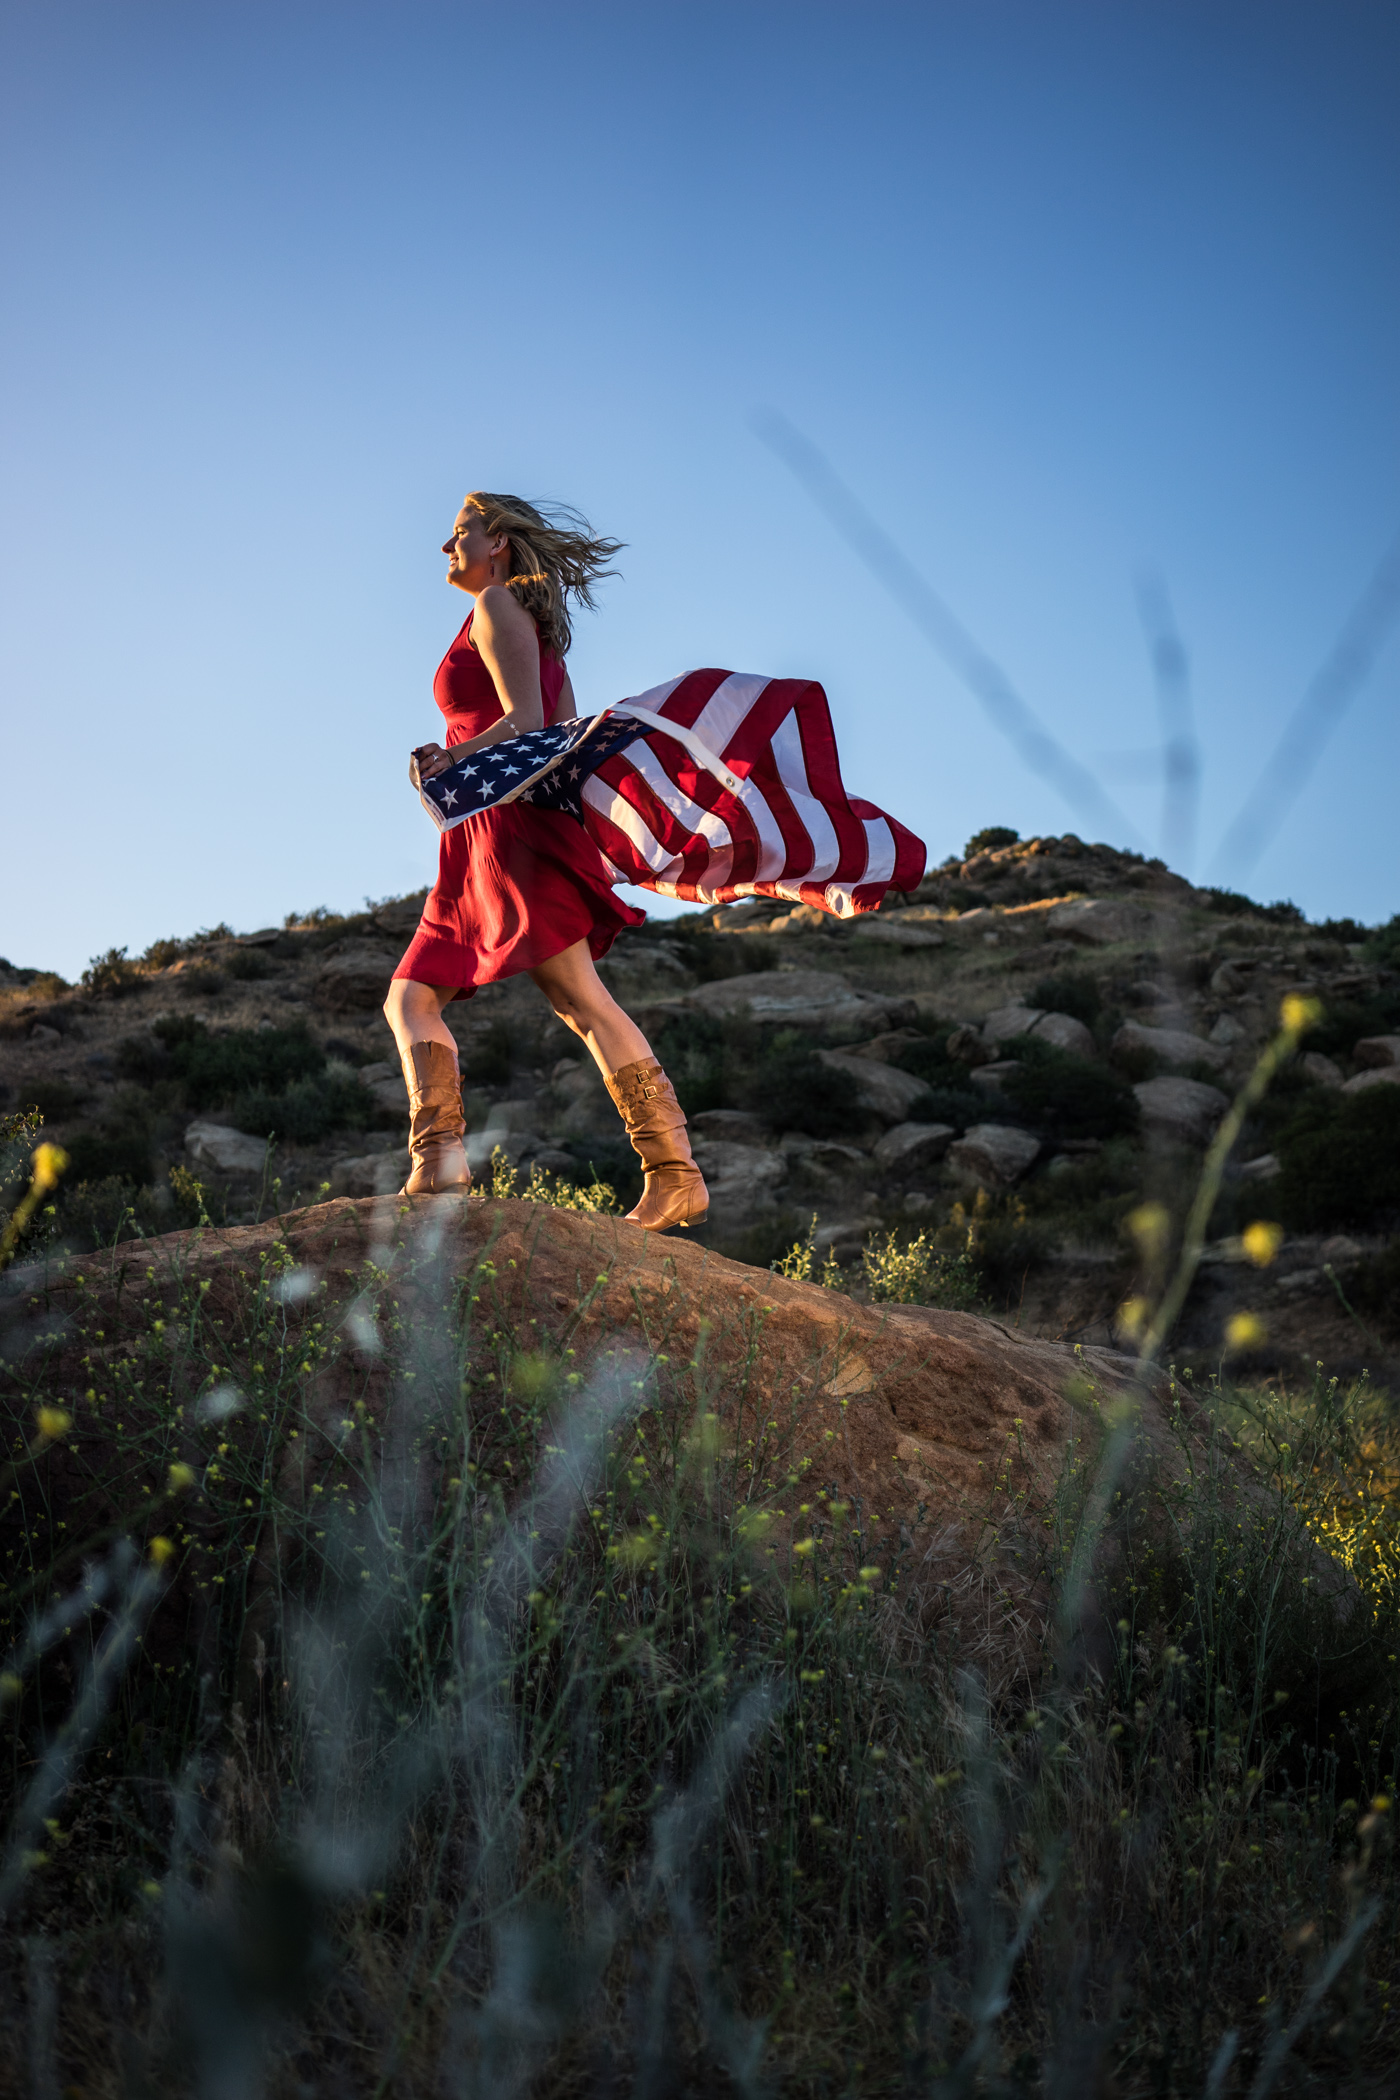 American woman and flag portrait in mountain landscape at sunset